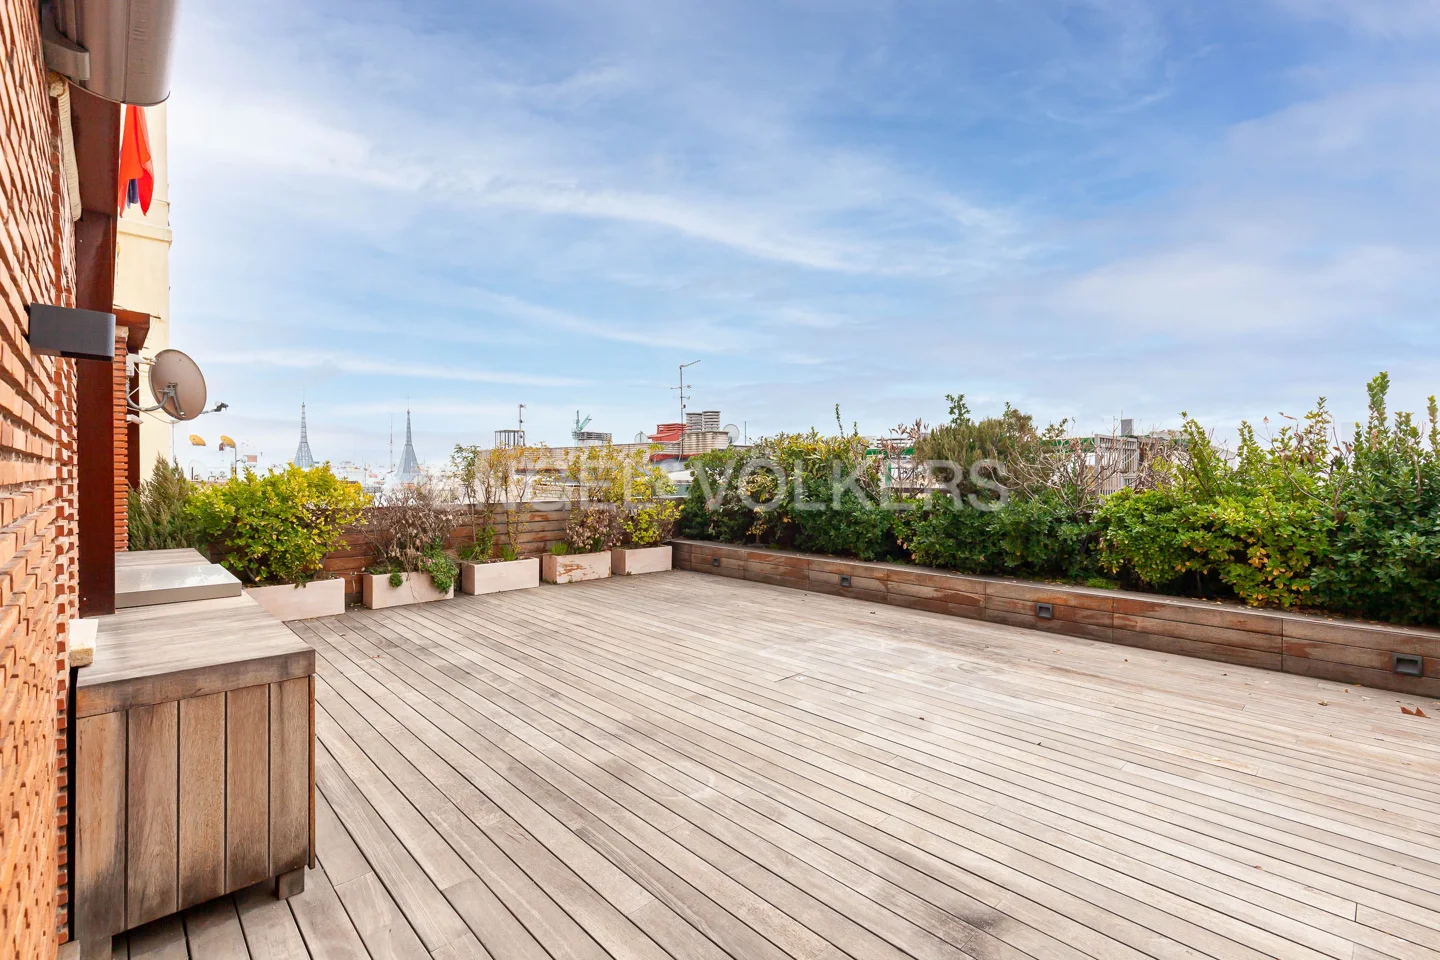 Exclusive property with a terrace of approximately 80 m2